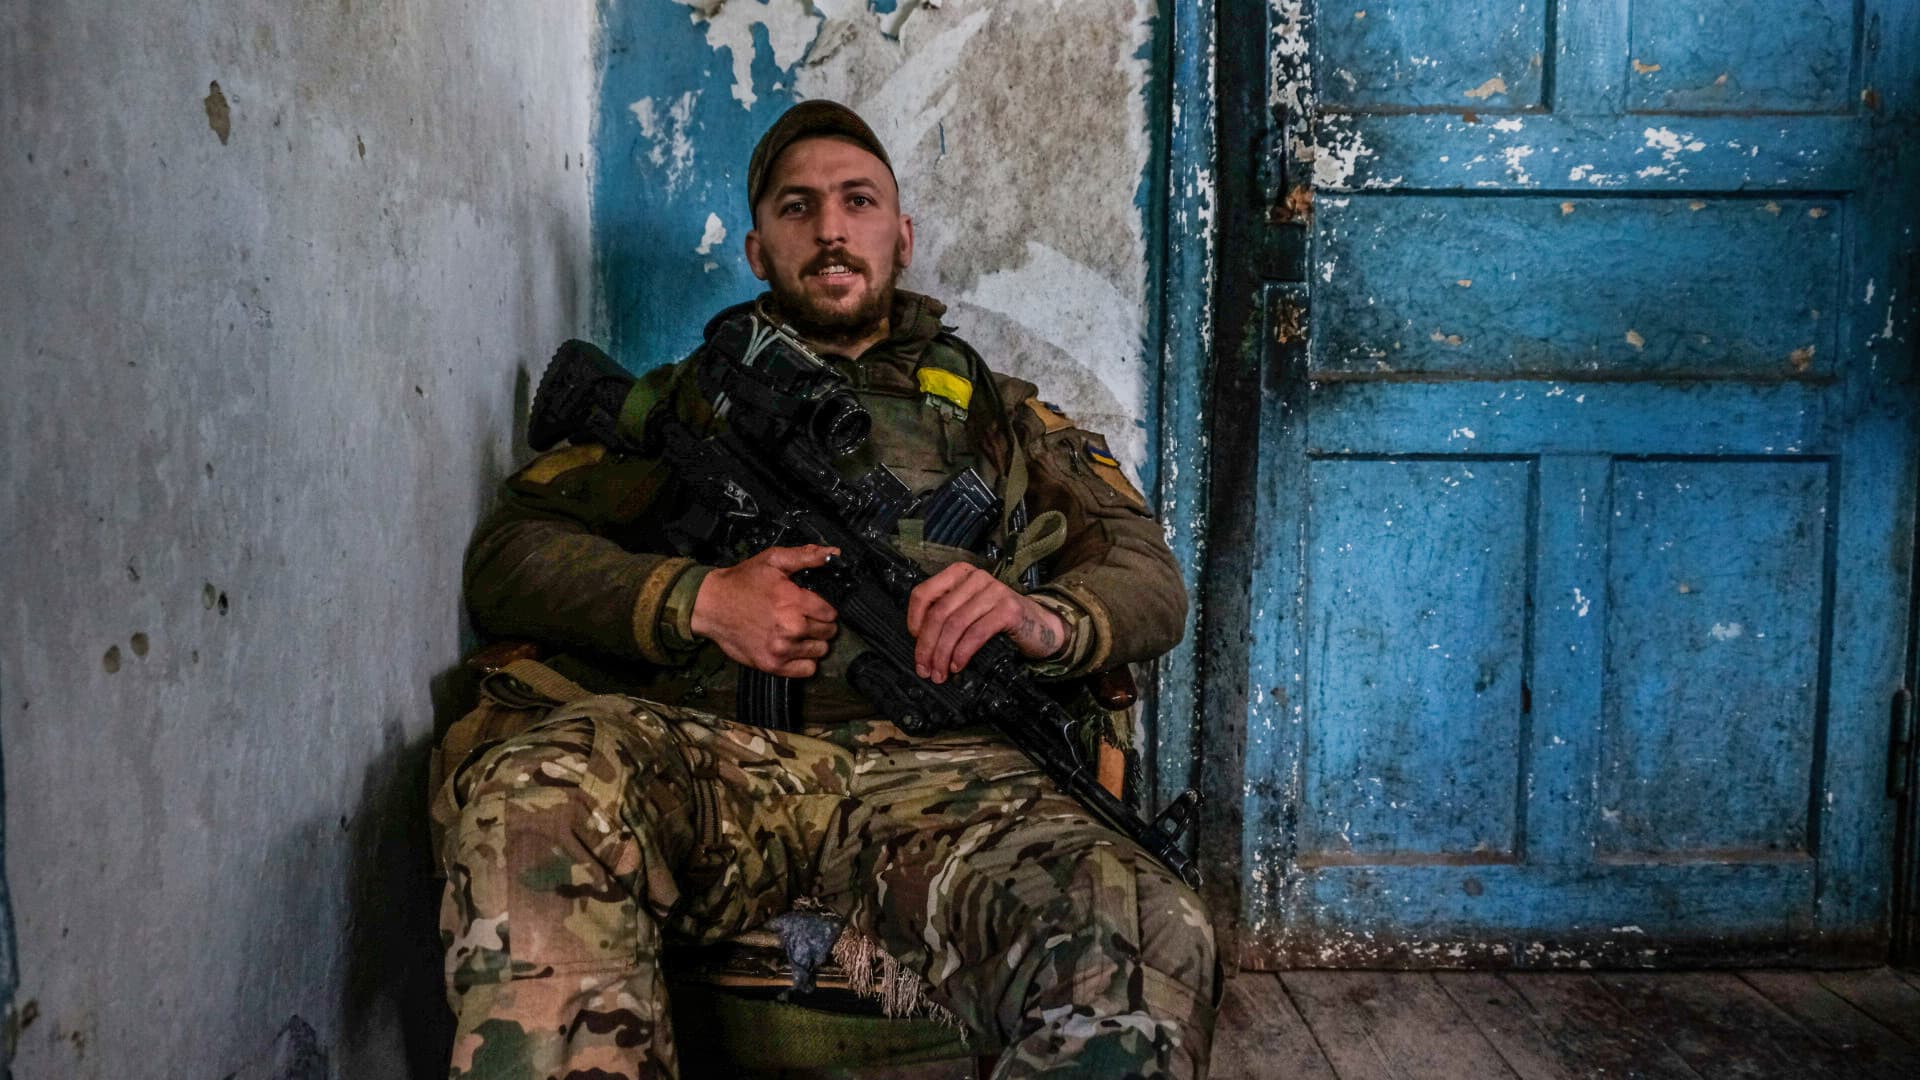 A soldier sitting at the entrance of the headquarter of the battalion. Soledar is a town in the Donetsk region, where it is being hammered by Russian artillery as it sits along the crucial road that leads out of besieged Severodonetsk.